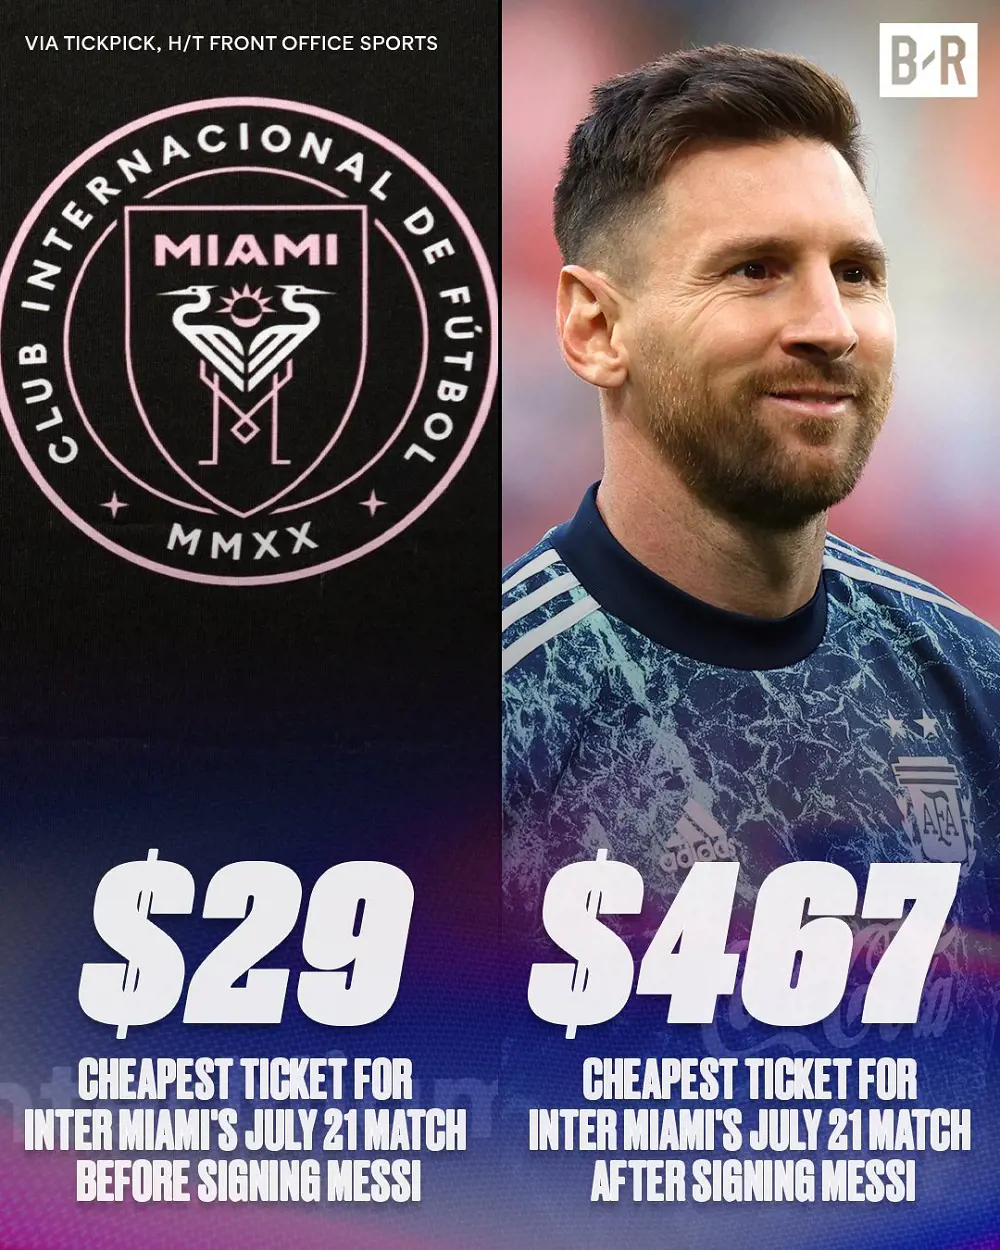 The Lionel Messi effect on Major League Soccer.